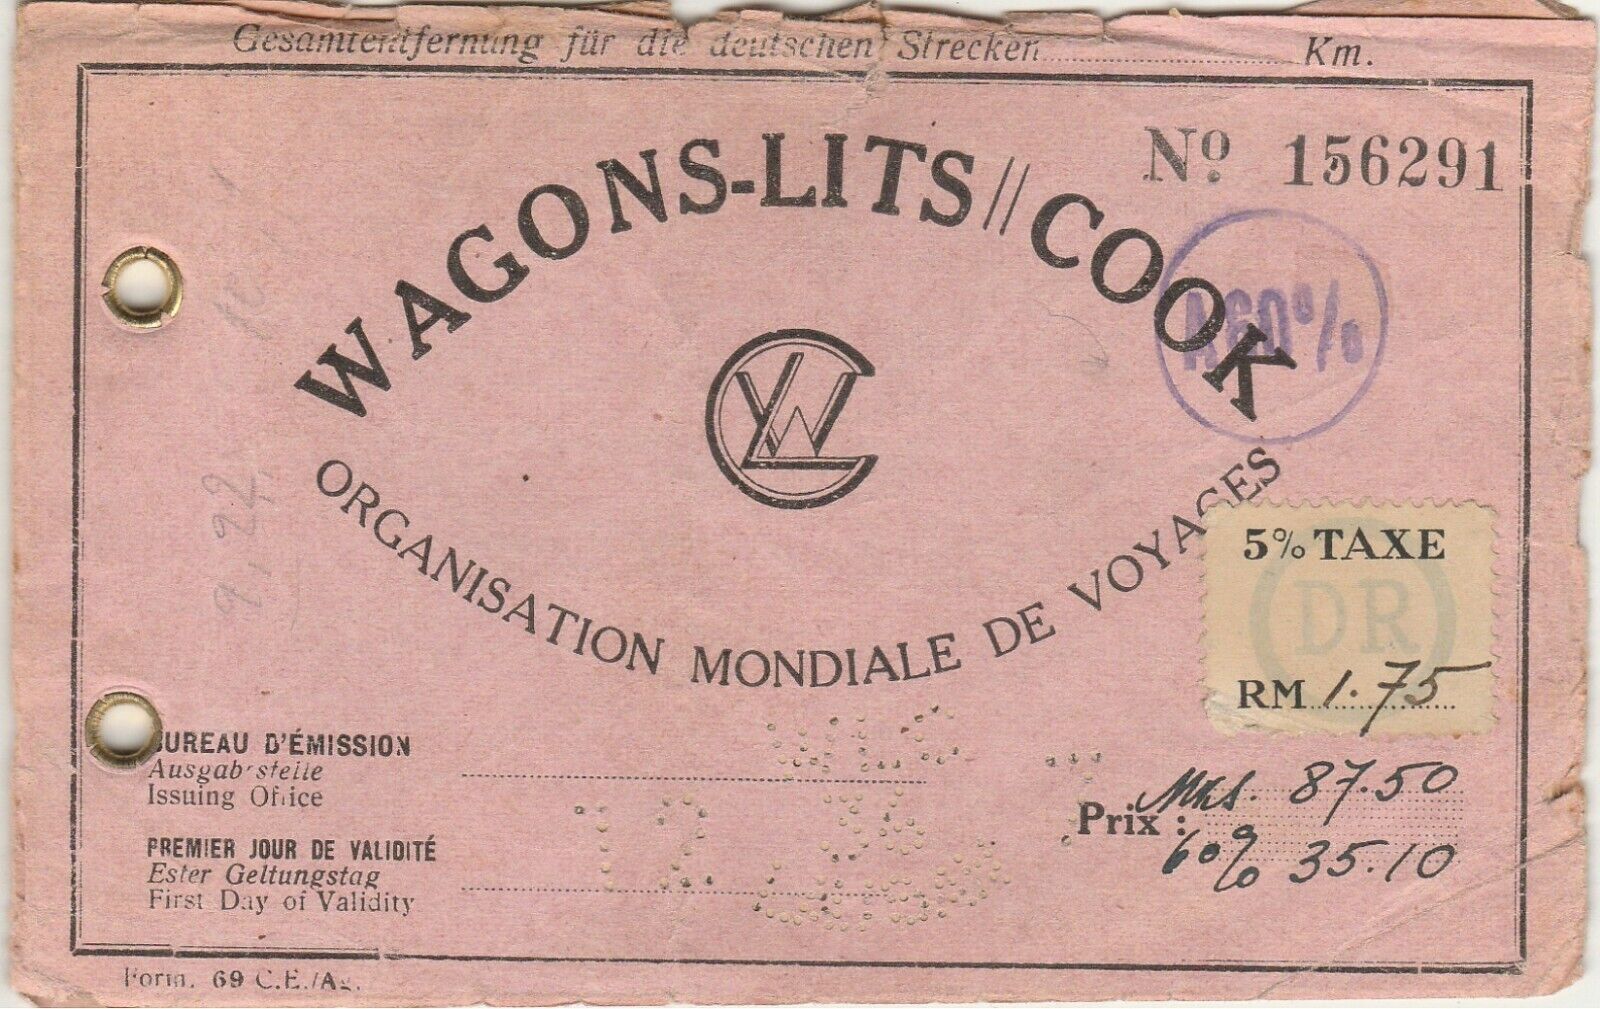 GERMANY-ENGLAND WAGONS-LISTS COOK Ticket Tied Tax Stamp 1936